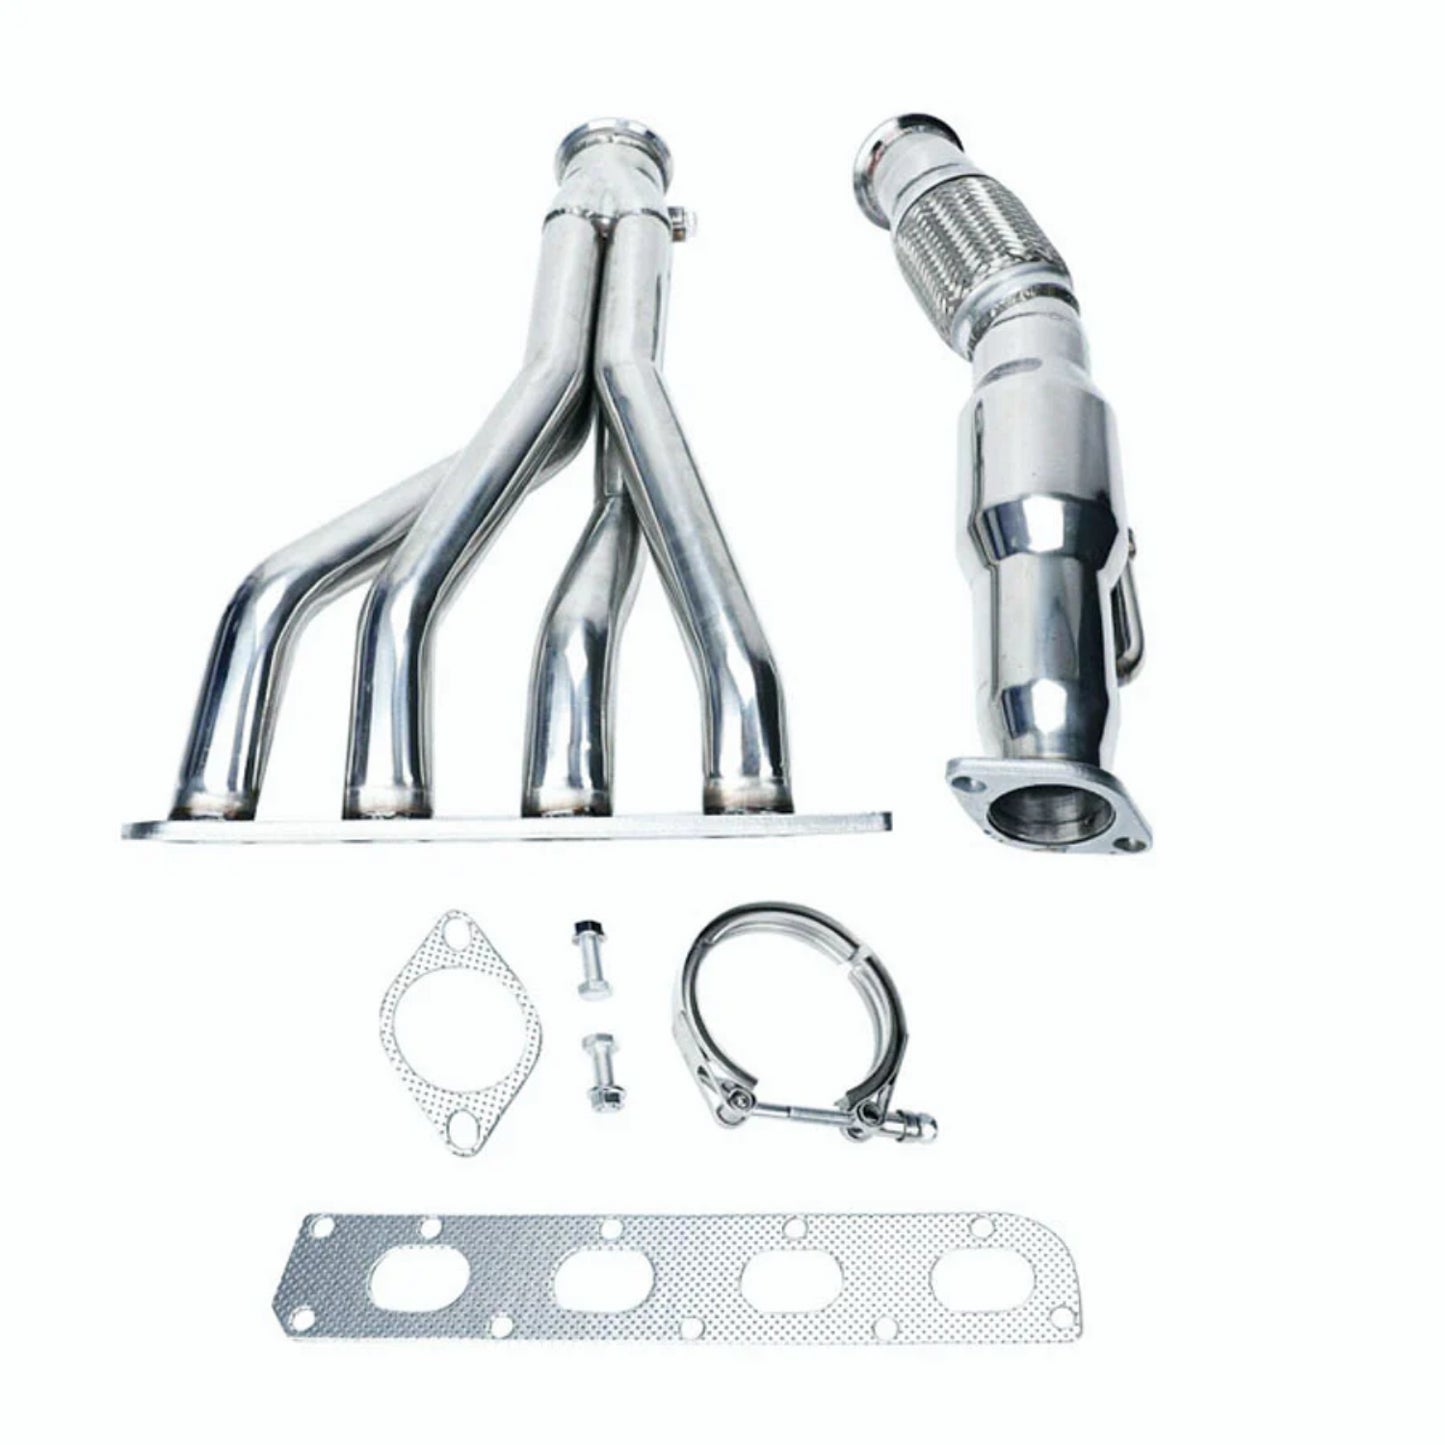 Exhaust Manifold Header for 2005-2007 Chevy Cobalt and 2004-2007 Saturn ION 2.0L